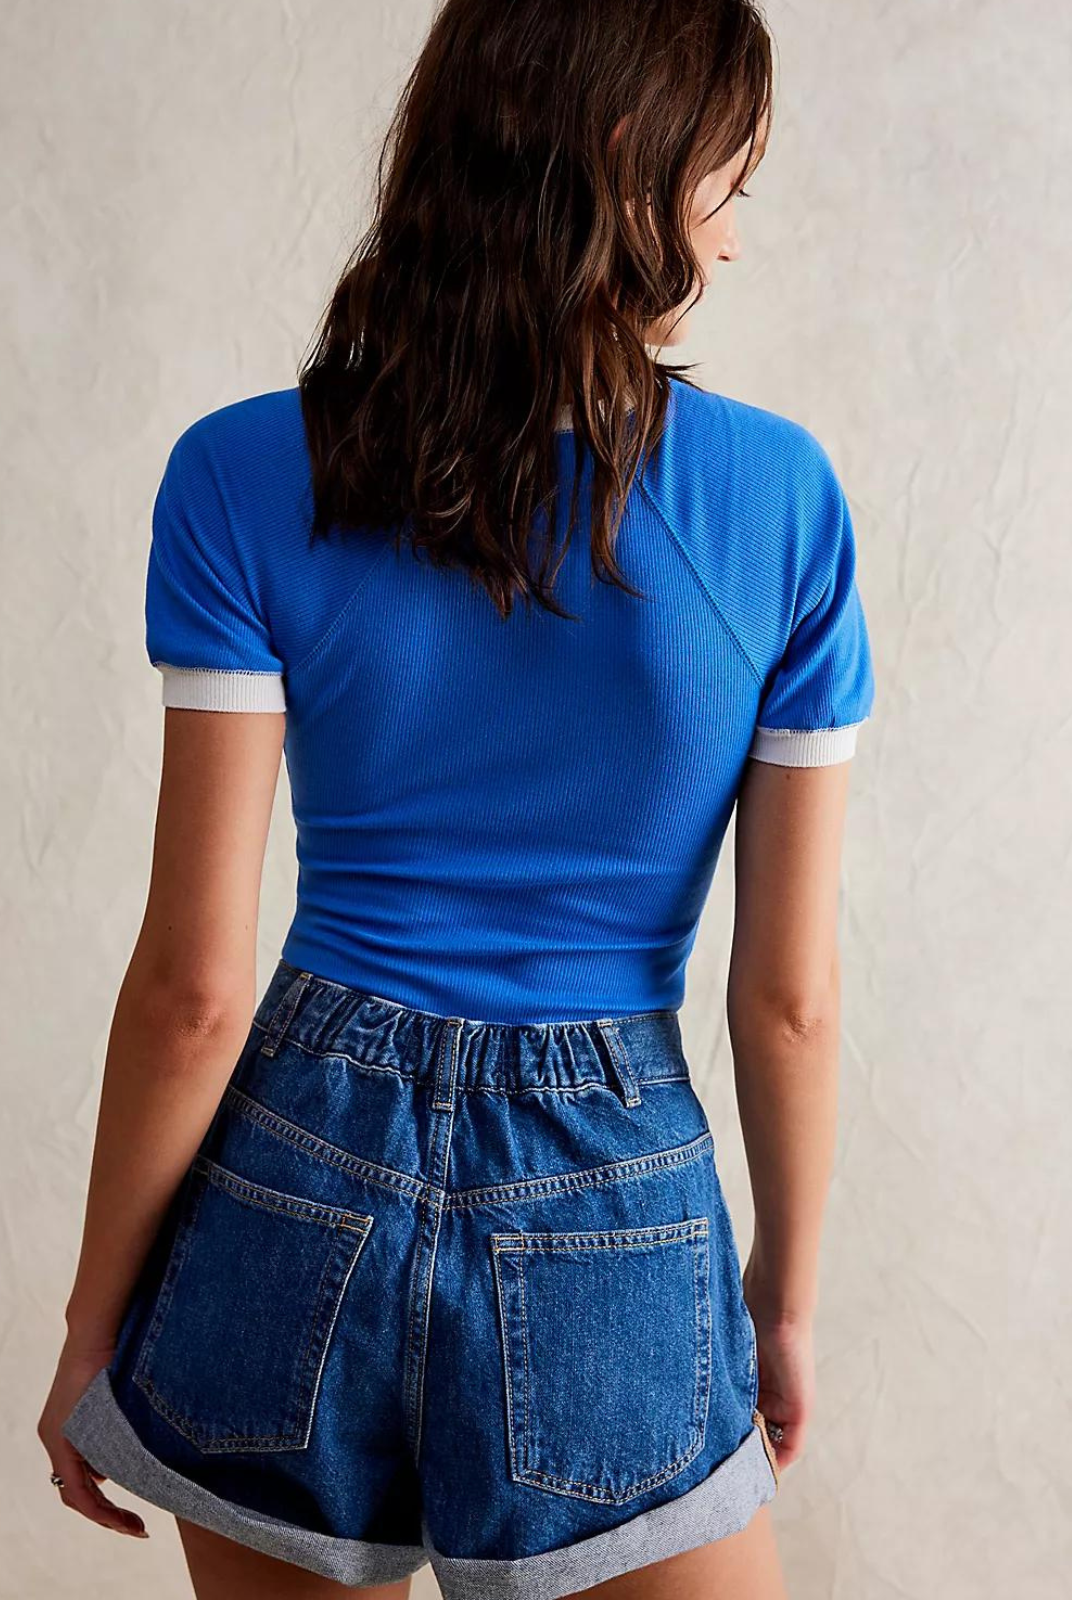 Free People Danni Shorts. Perfectly pleated, these timeless denim shorts have the perfect touch of vintage-inspired charm.